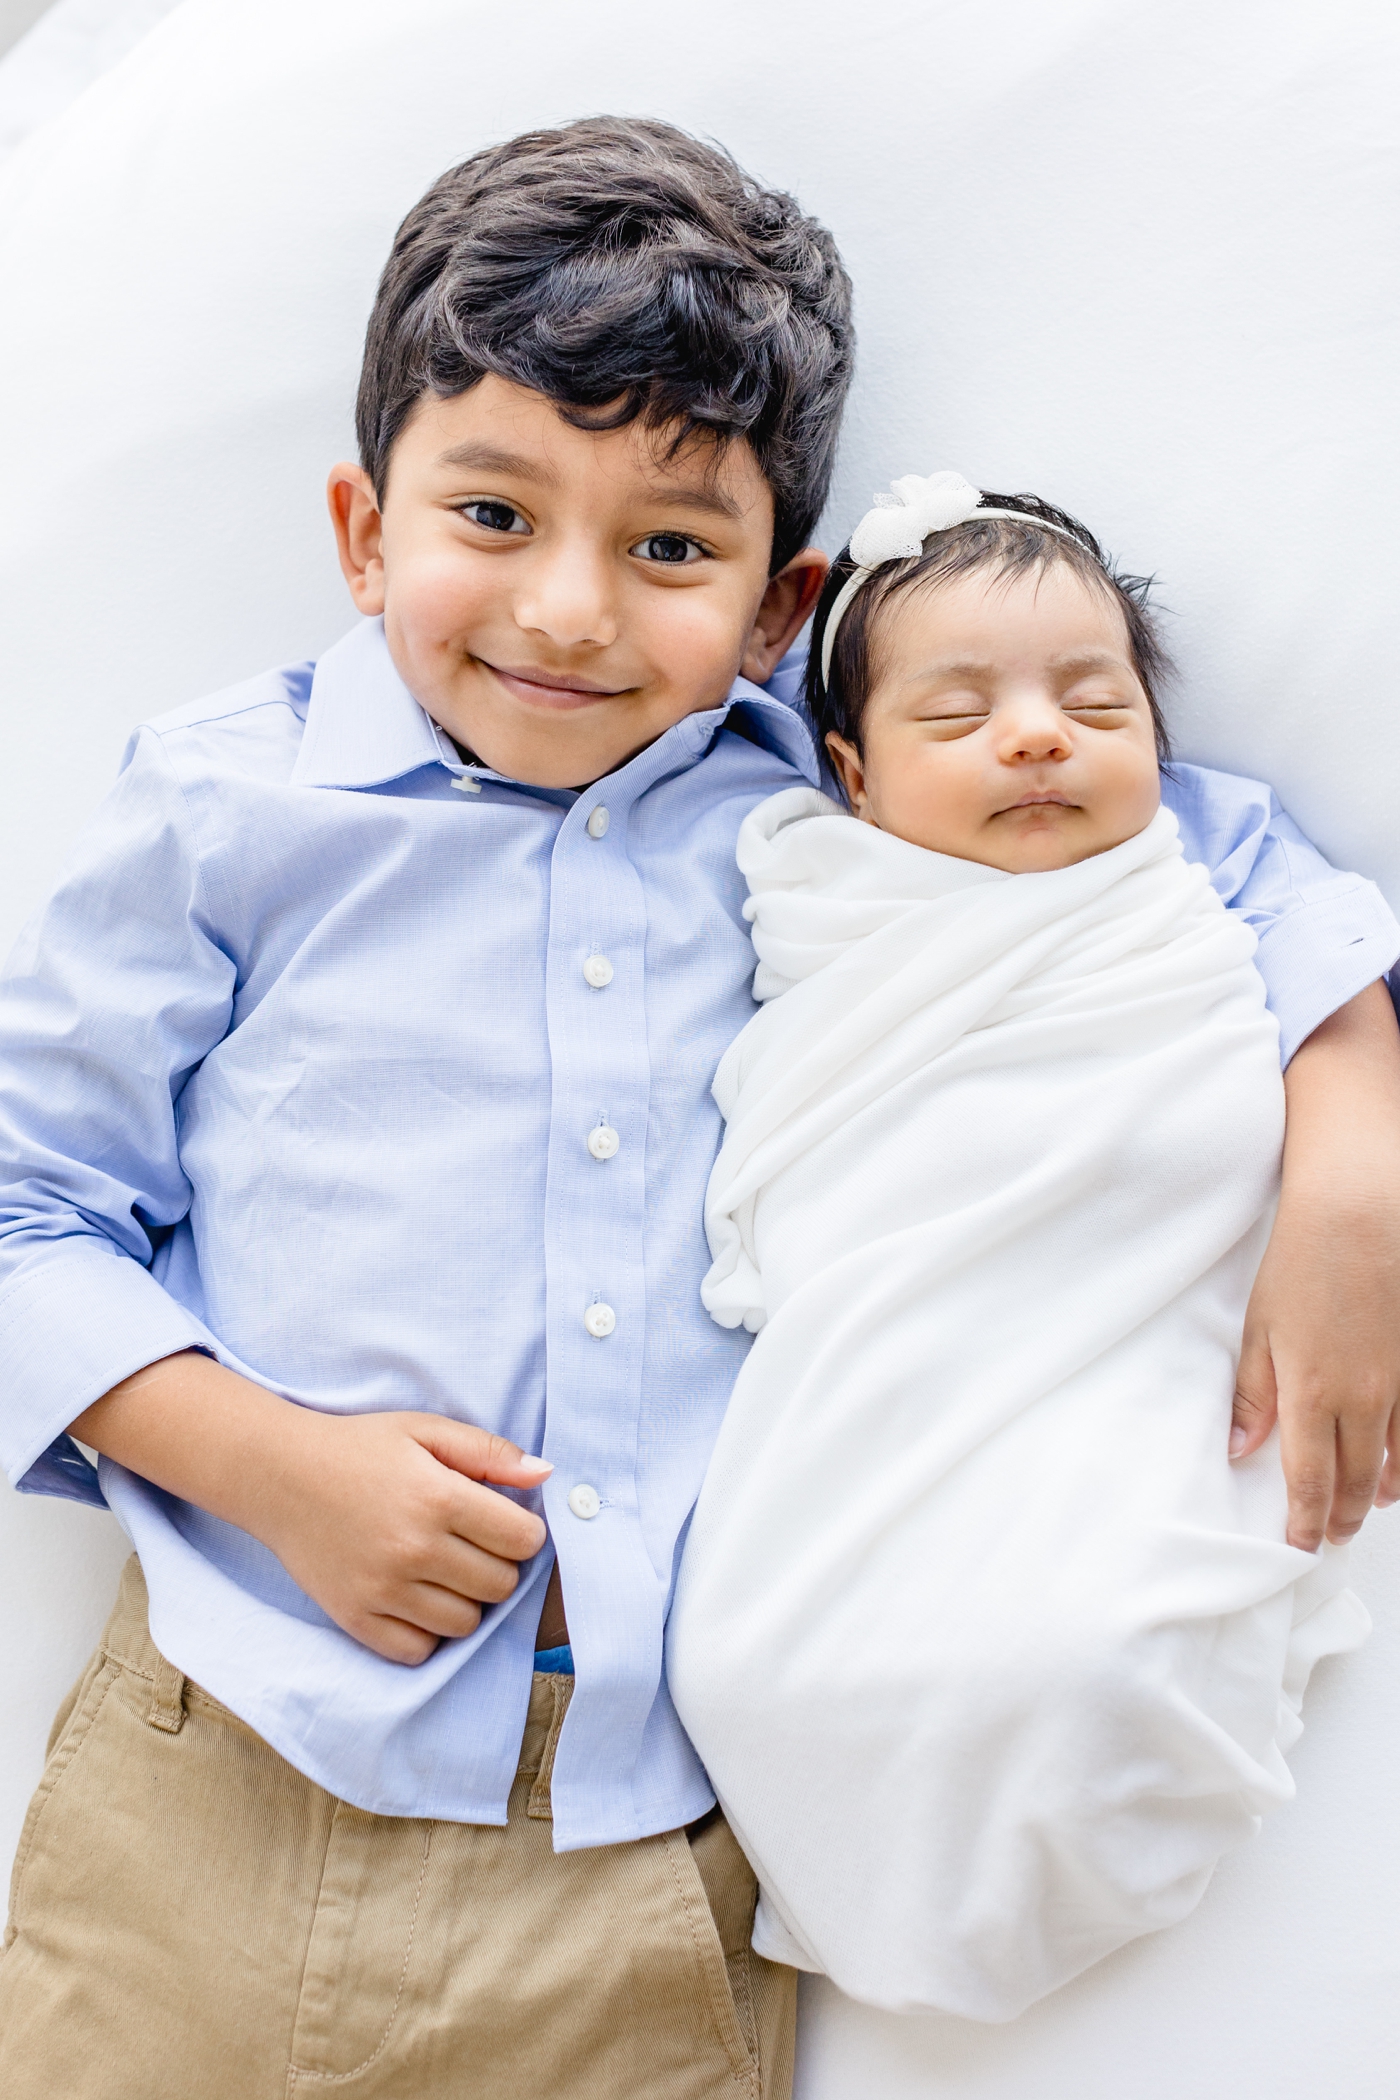 Brother holding baby sister in arms. Photo by Sana Ahmed Photography.